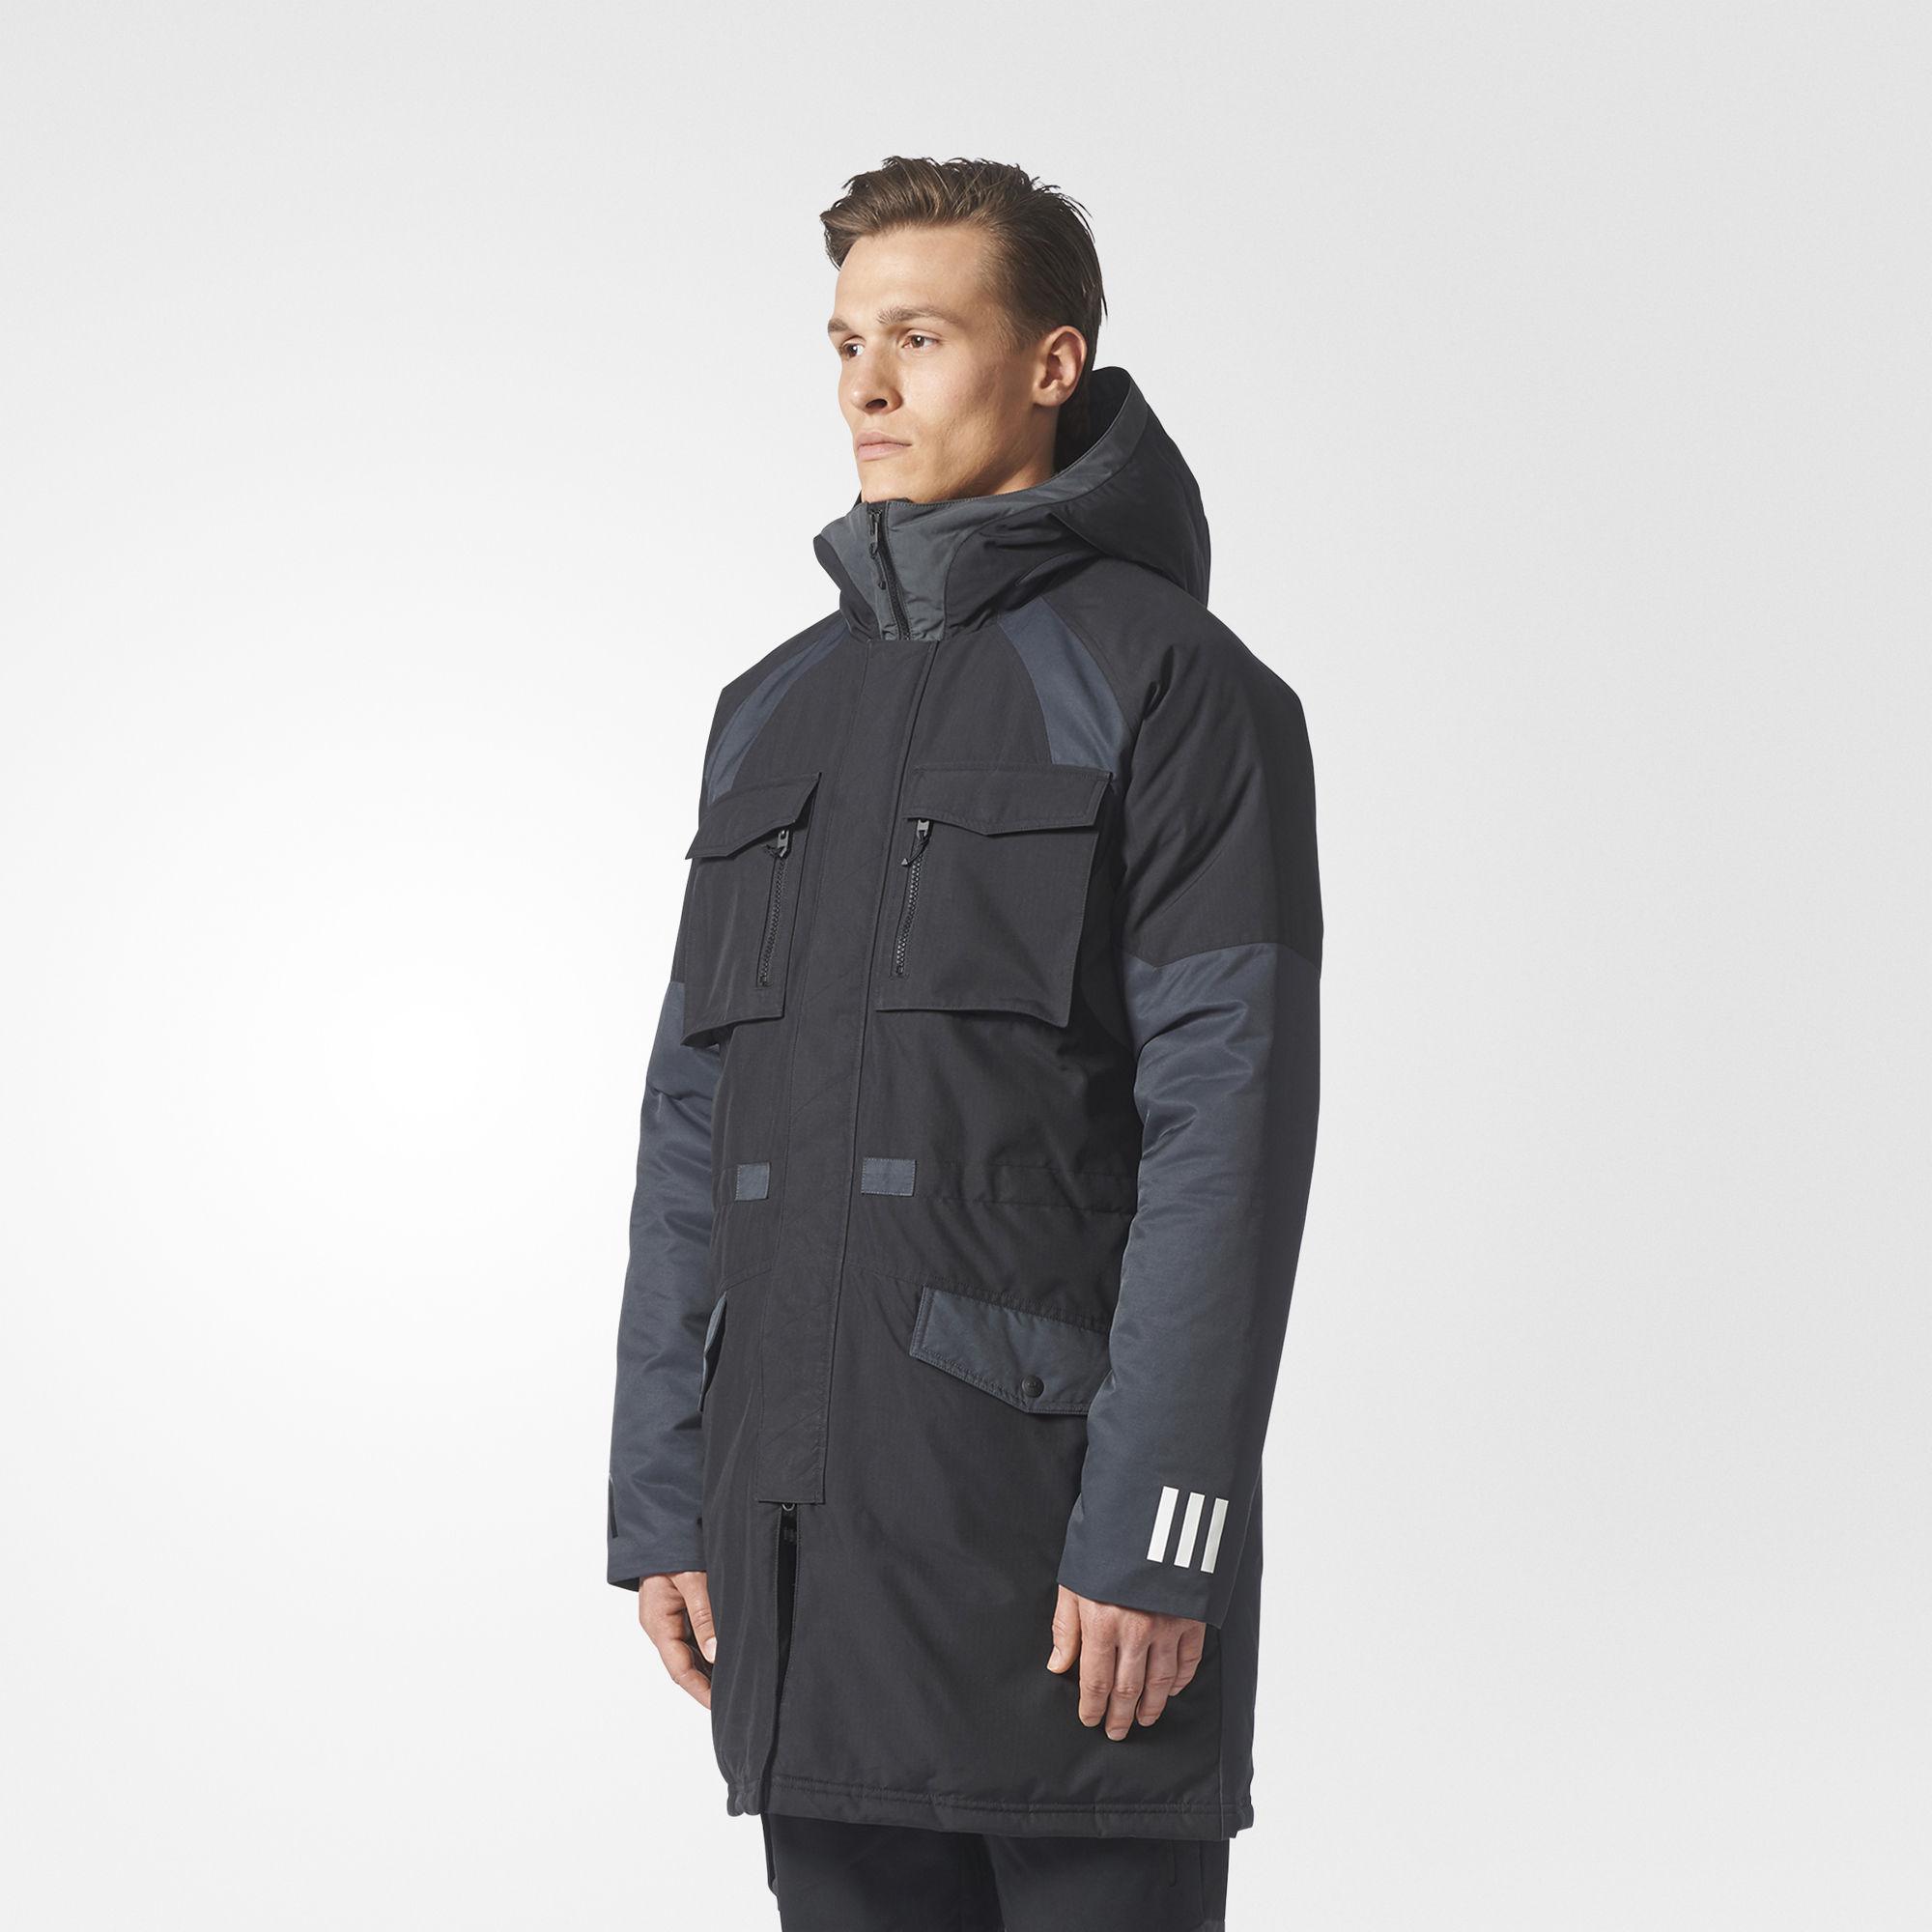 White Mountaineering Jacket Flash Sales, SAVE 54% - lutheranems.com